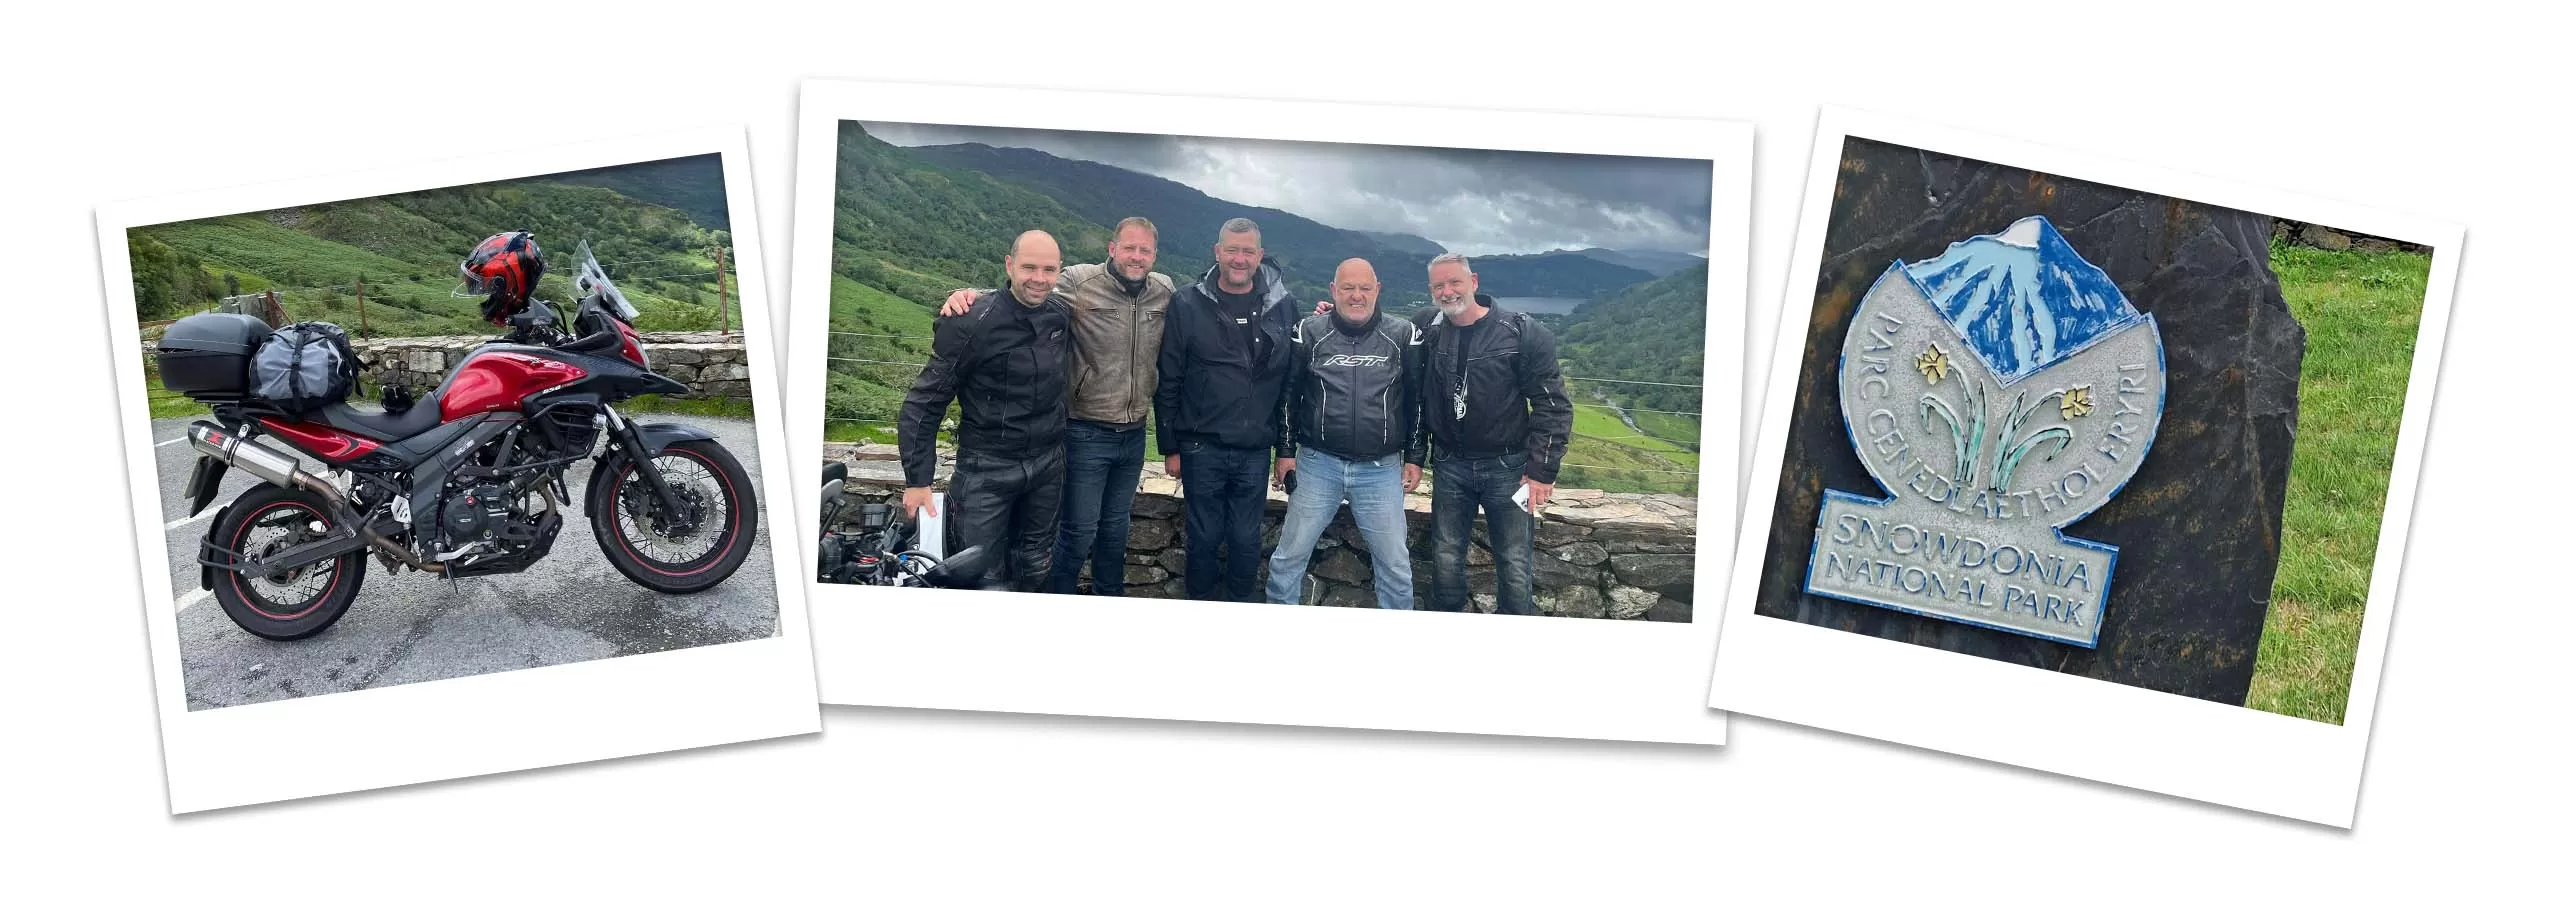 Our E-Commerce Supervisor, Steve, took his Suzuki V-Strom to Wales and back!